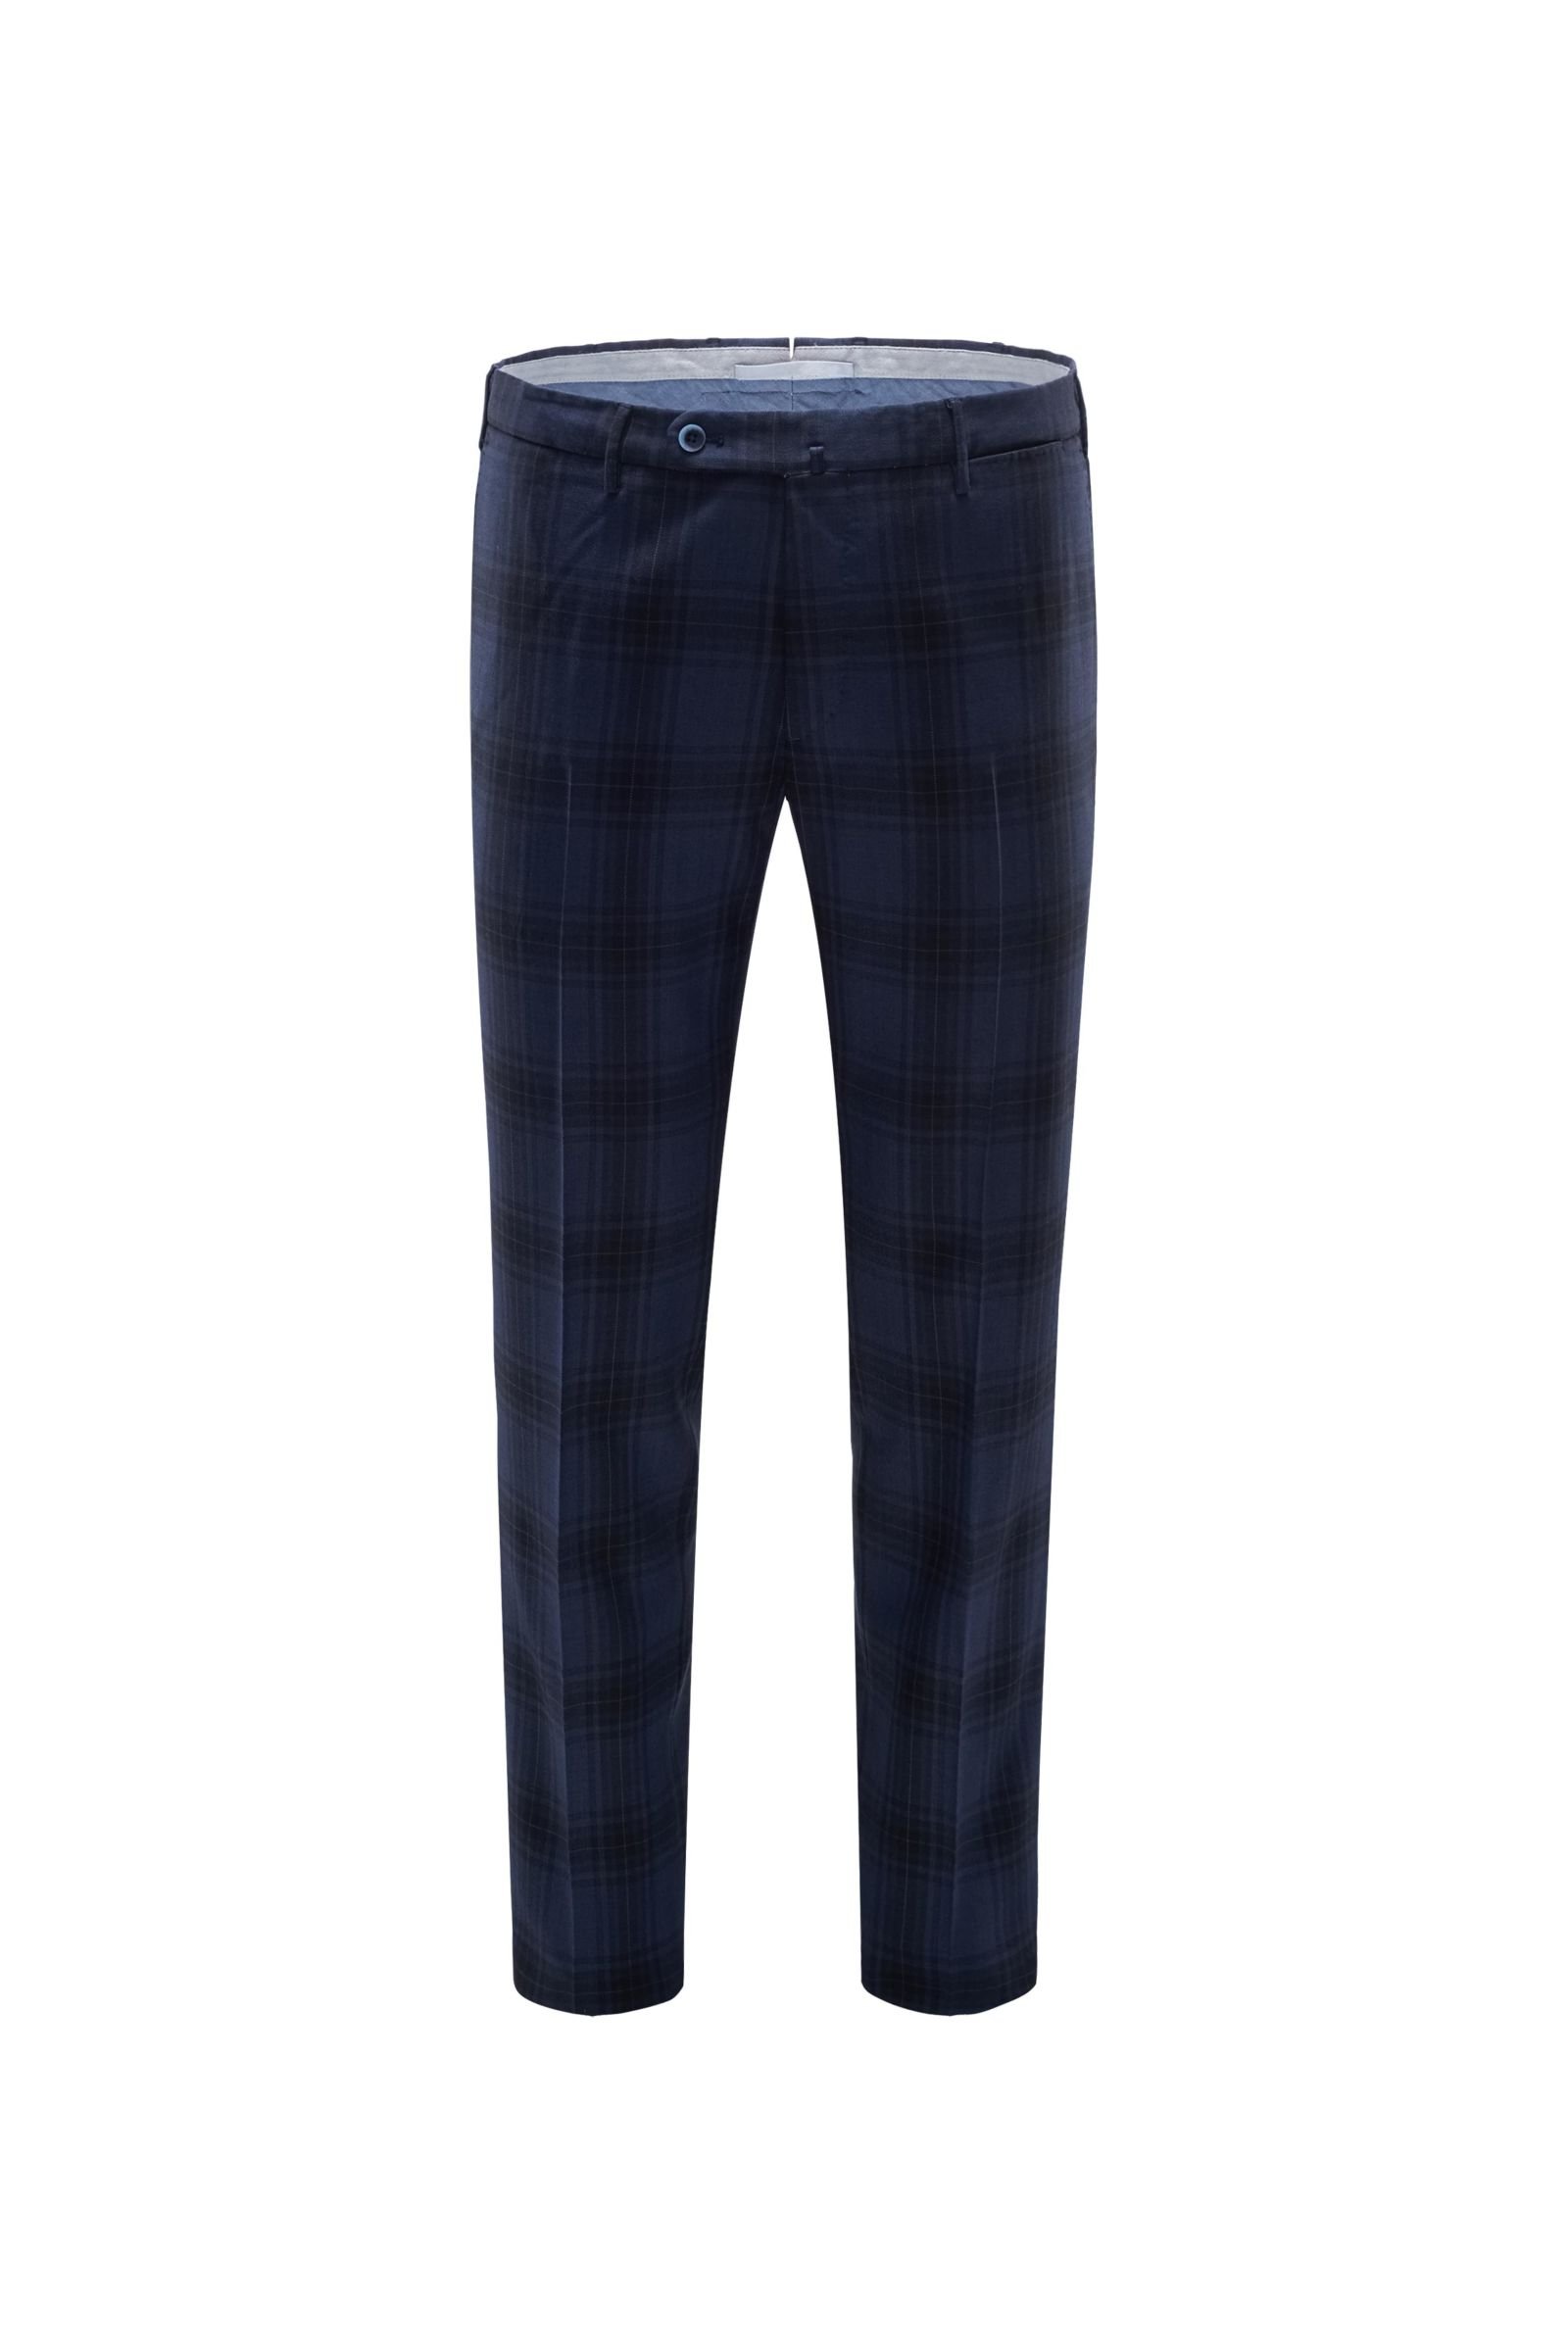 Wool trousers grey-blue checked